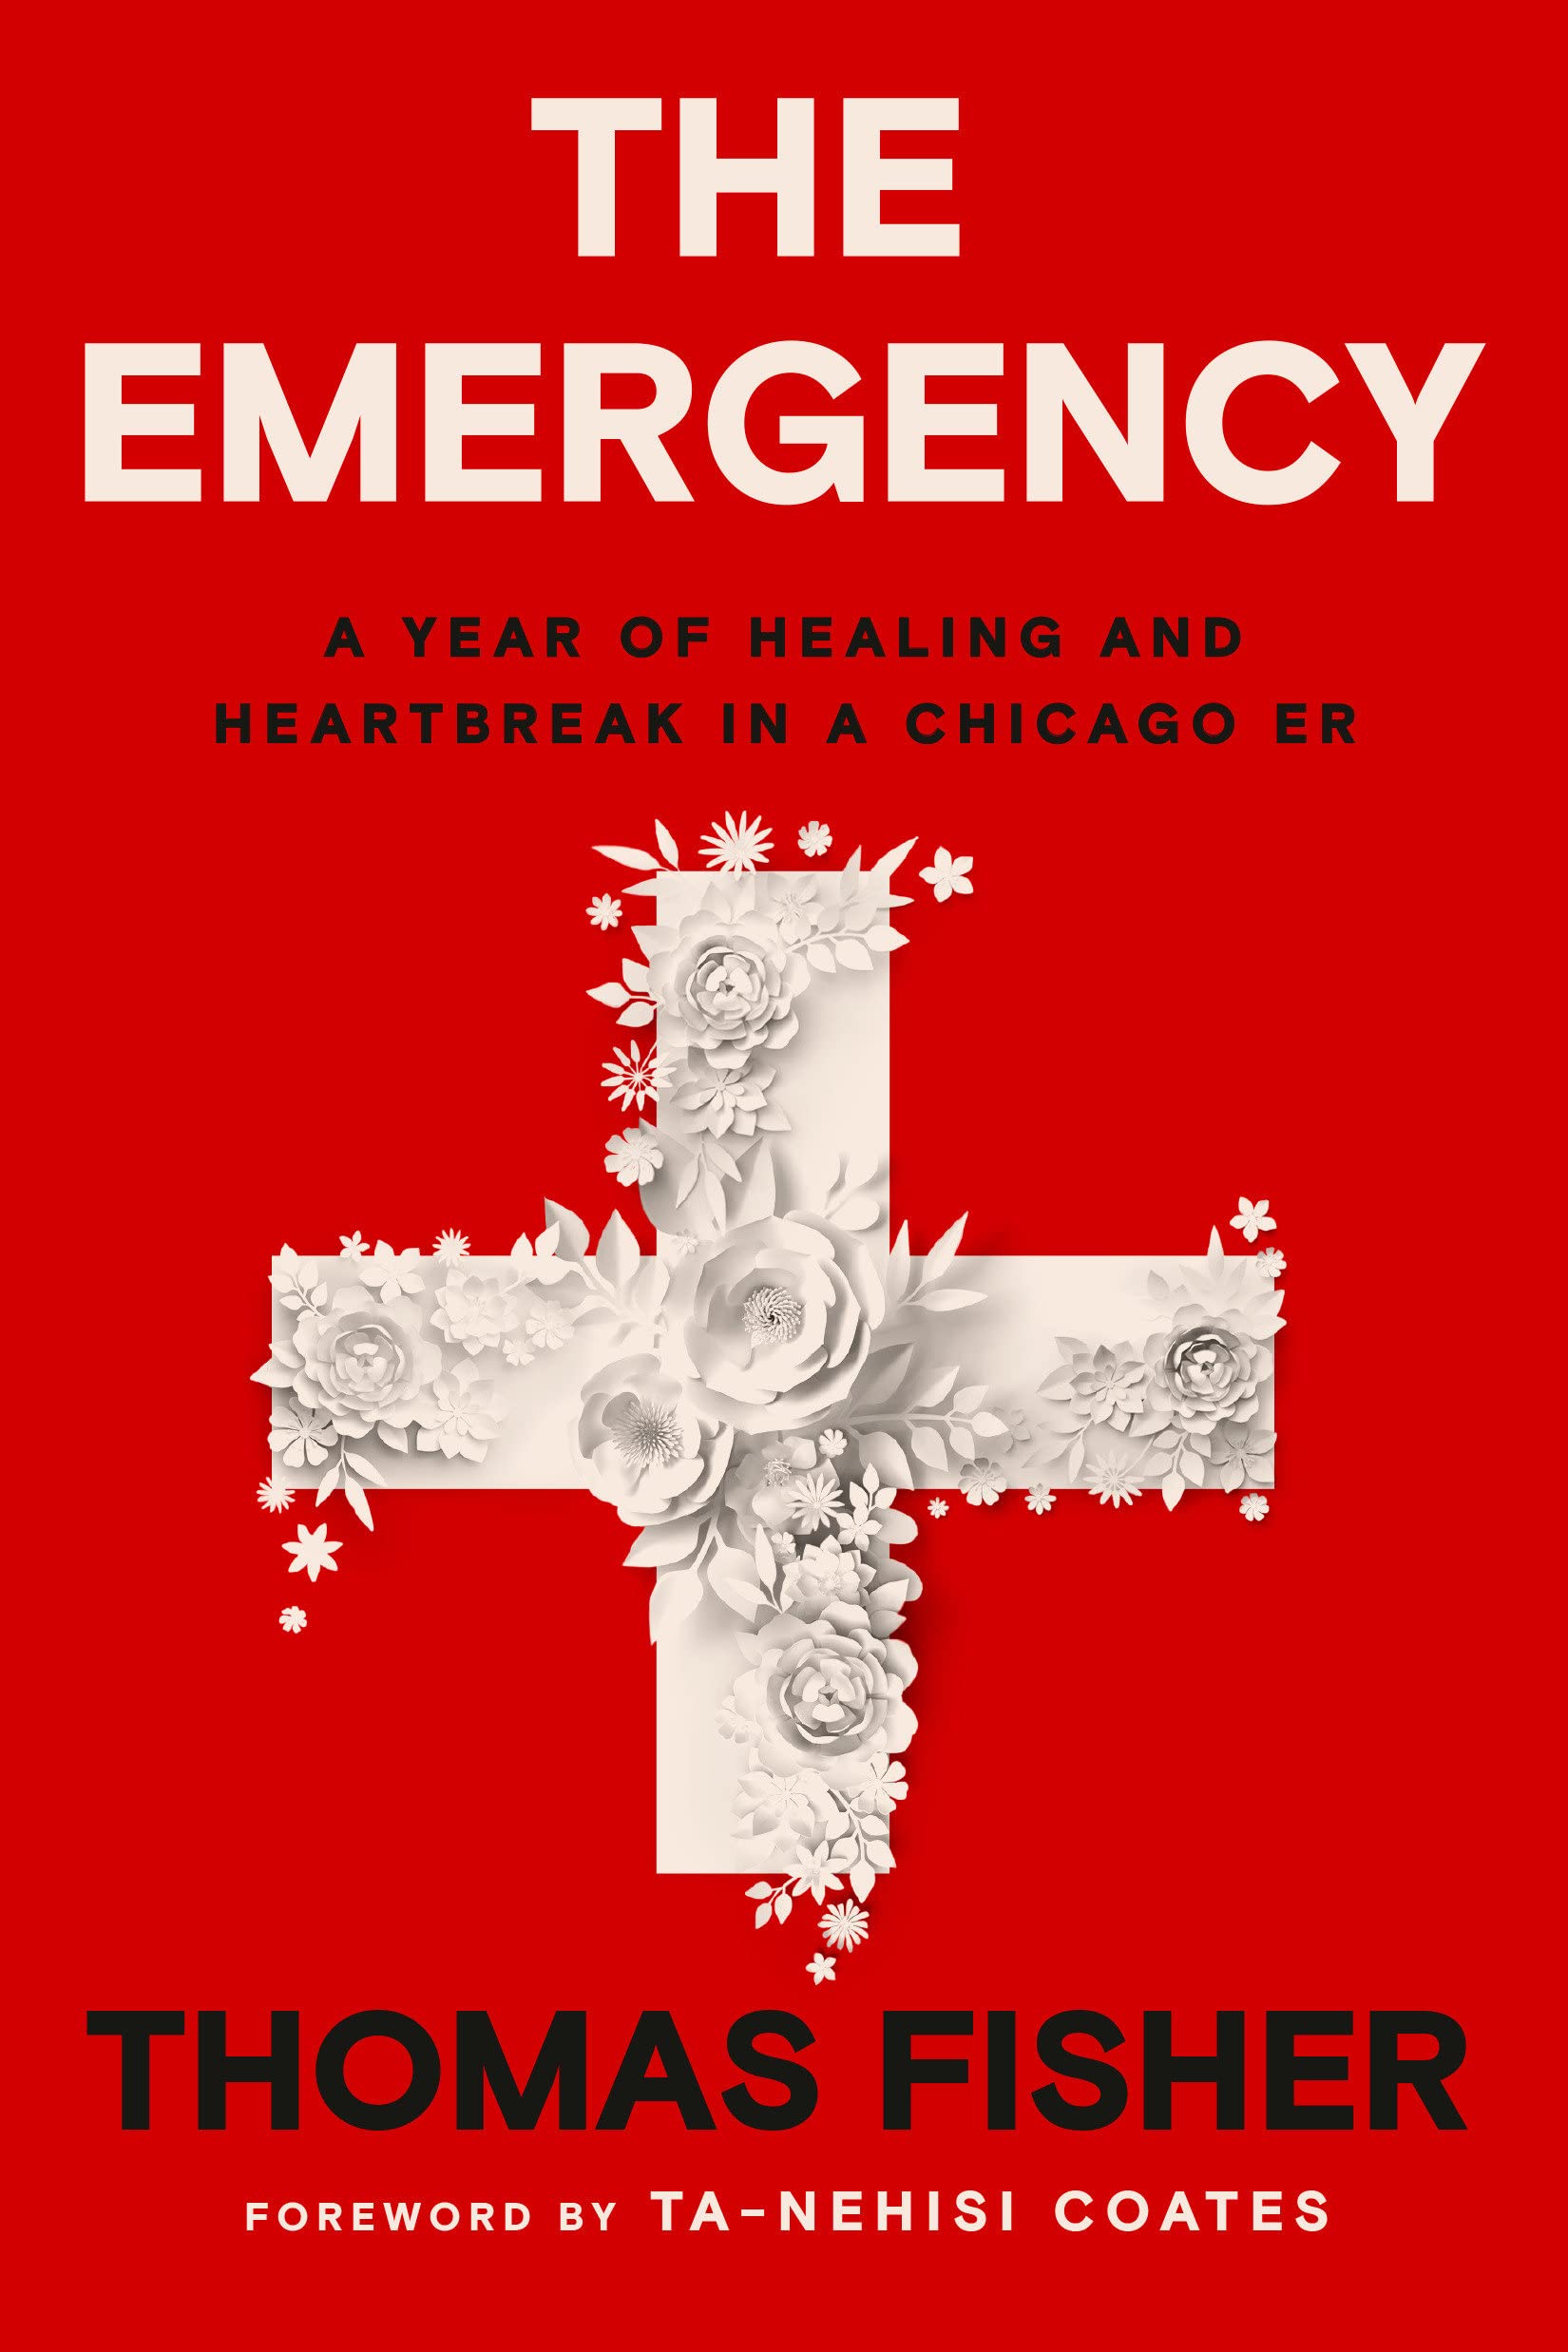 The Emergency by Thomas Fisher, Md, MPH